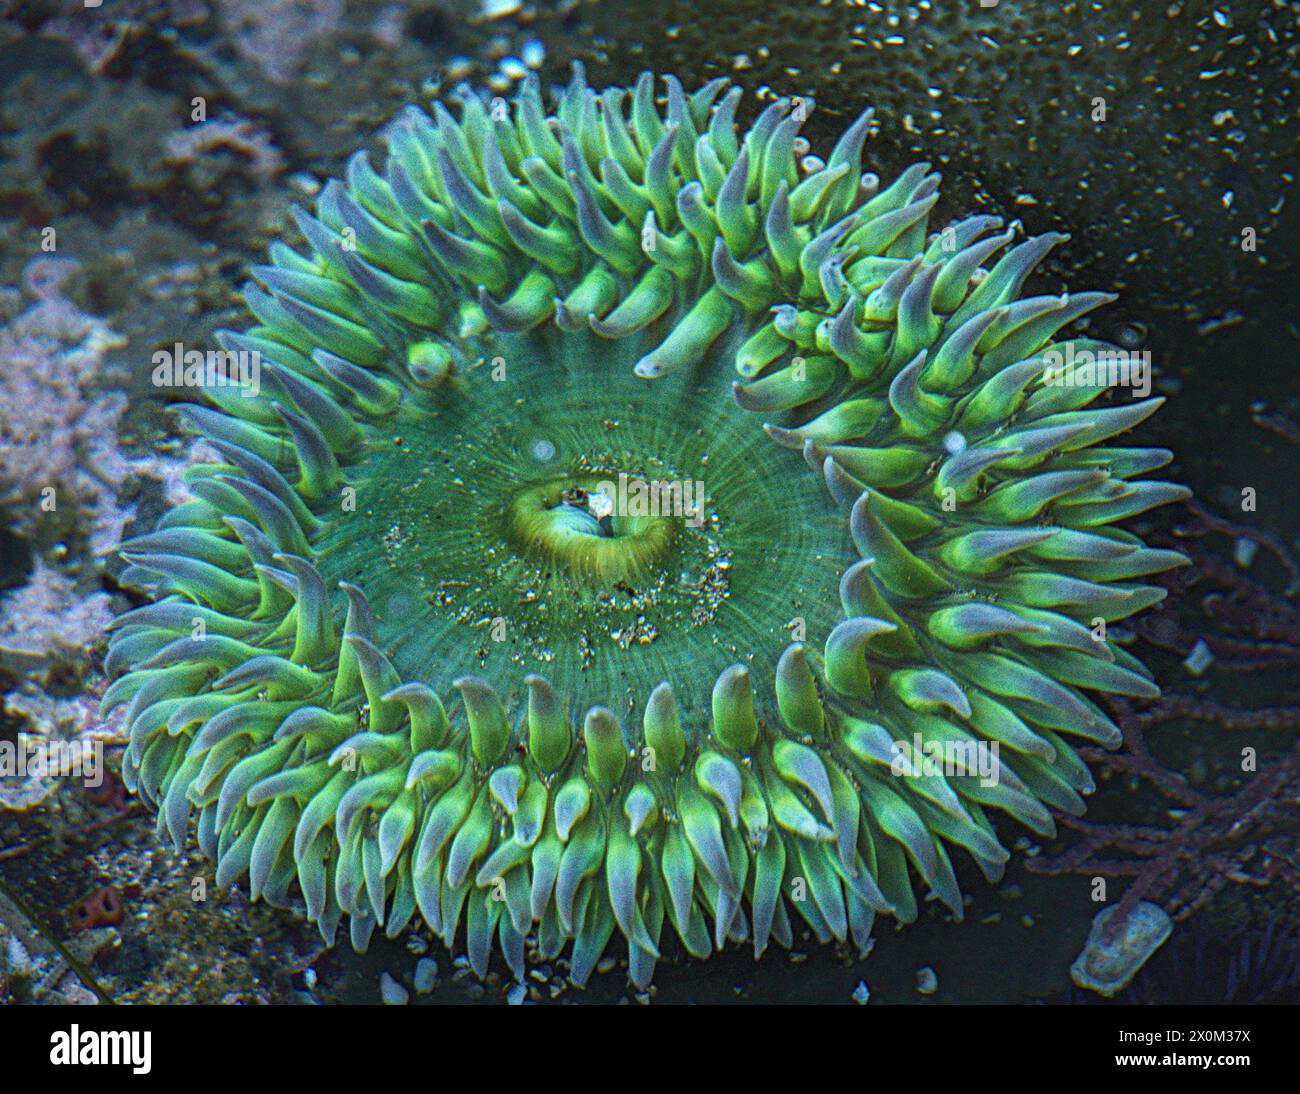 Tide pool with green sea anemones Stock Photo